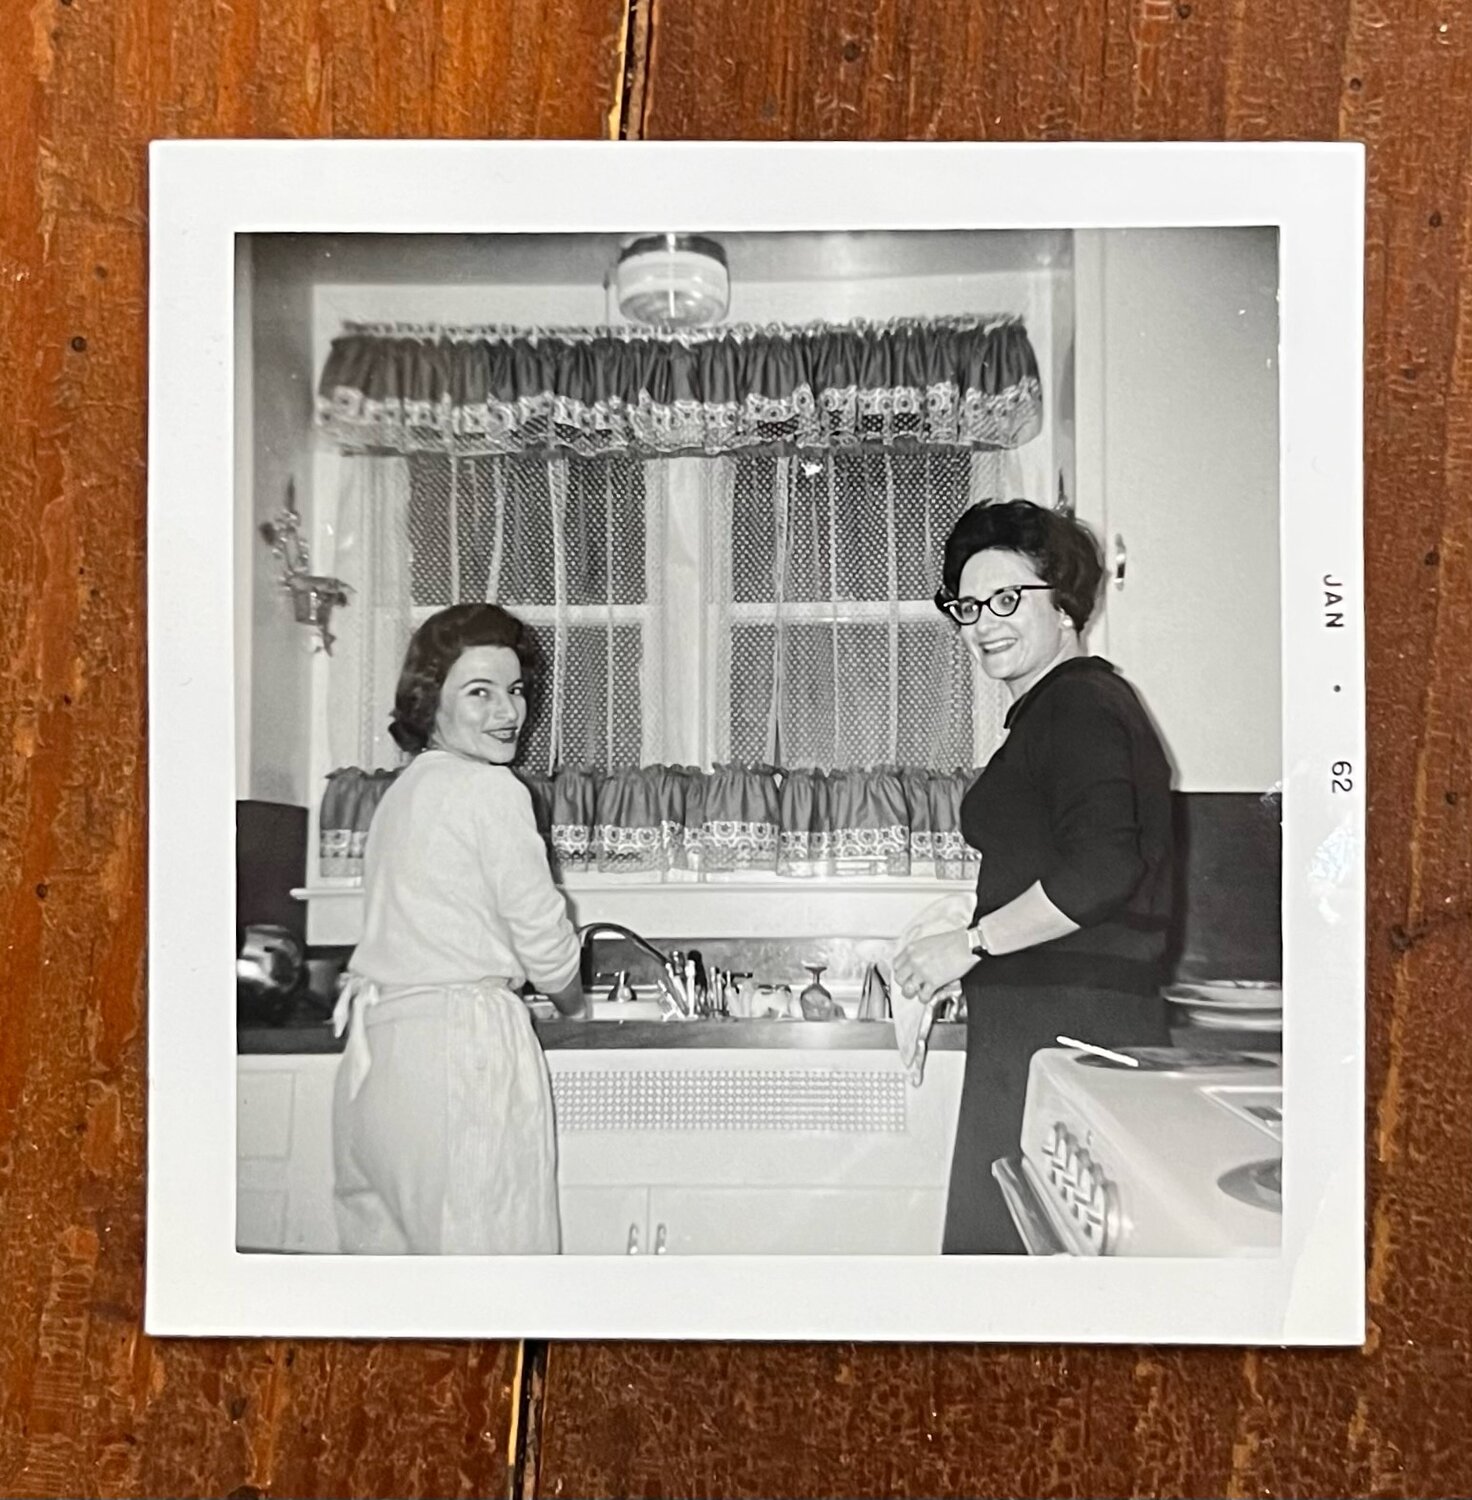 Barbara Fox, left, and my father's sister, Aunt Marcia, looking delighted to be washing dishes after some family get-together in January 1962. I dug this photo up after artist Barbara Winfield's take on women and motherhood in her exhibit titled "Mad Ads and Funny Phrases."